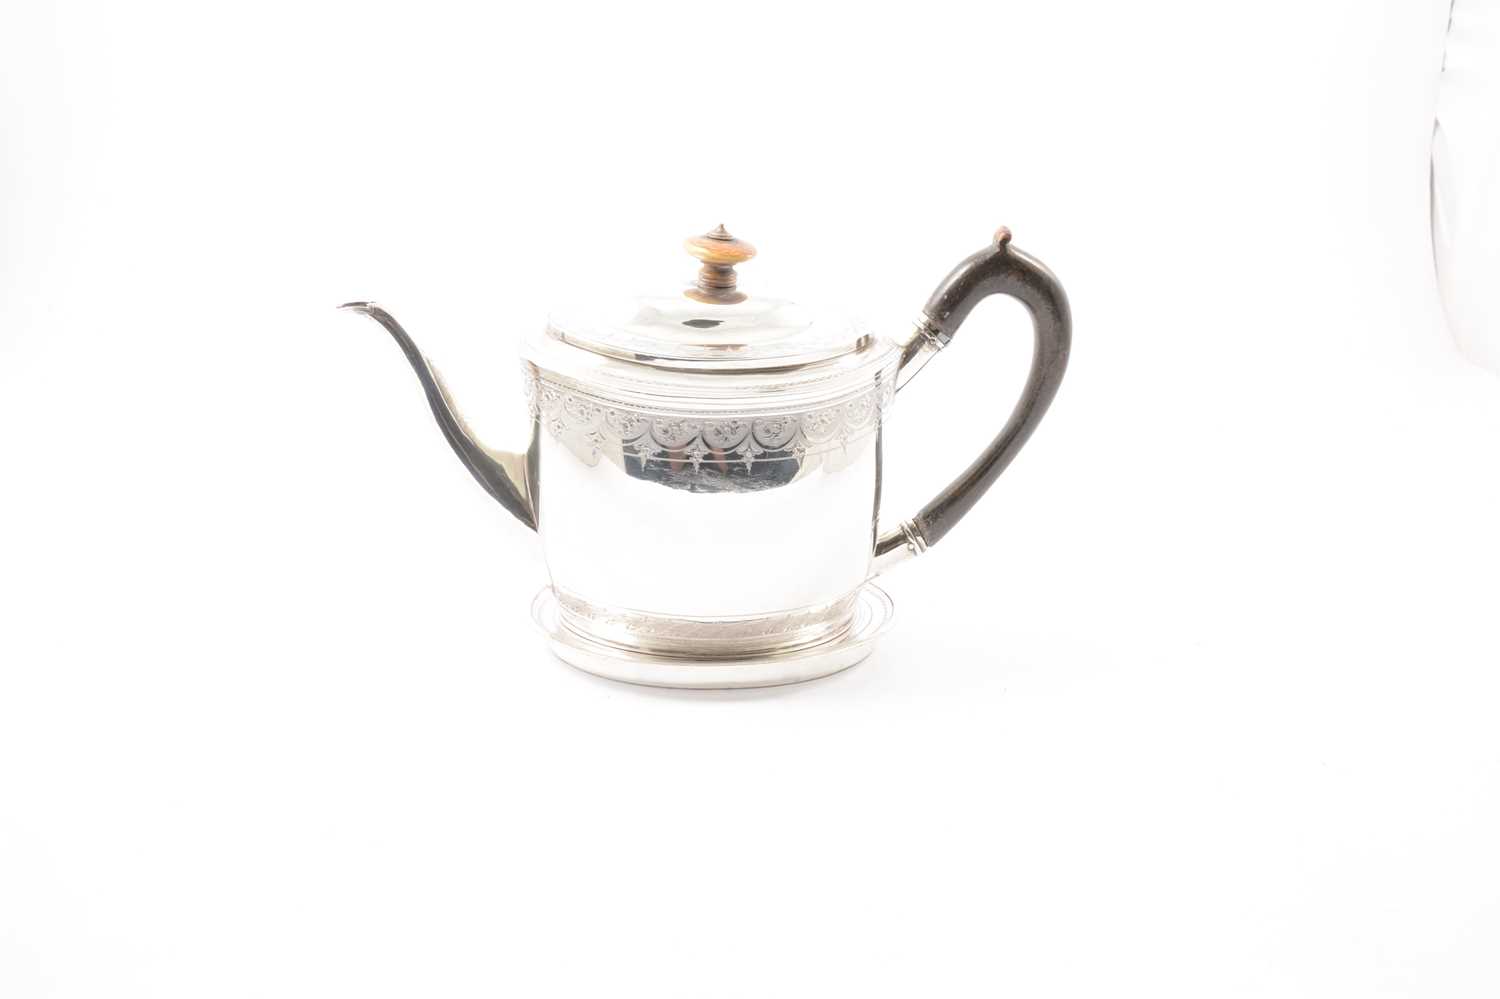 Lot 143 - Georgian silver teapot with matching stand, James Mince, London 1799.